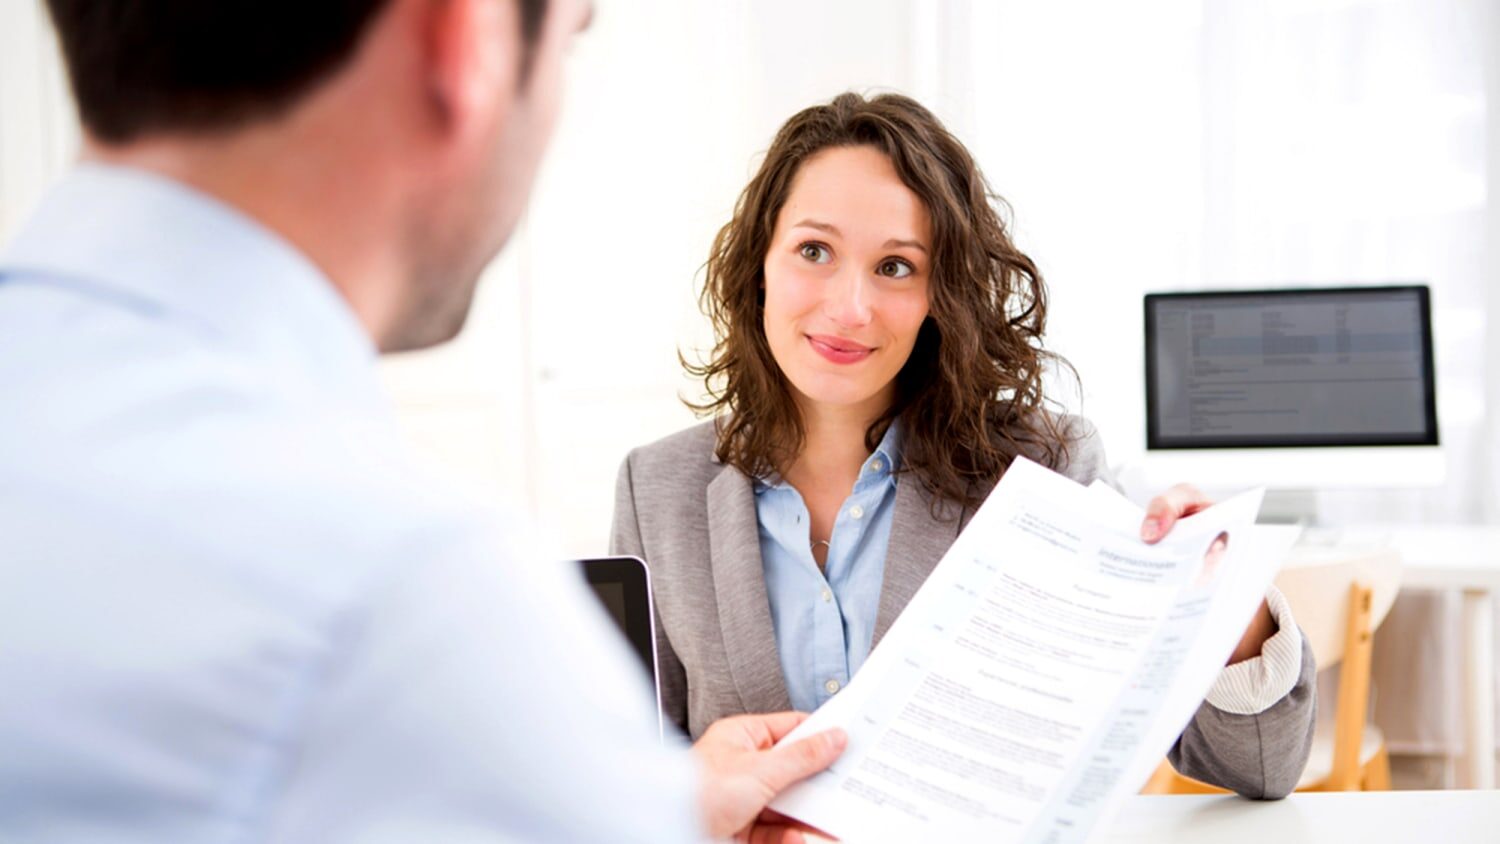 How to land your dream job: Essential resume and interview tips